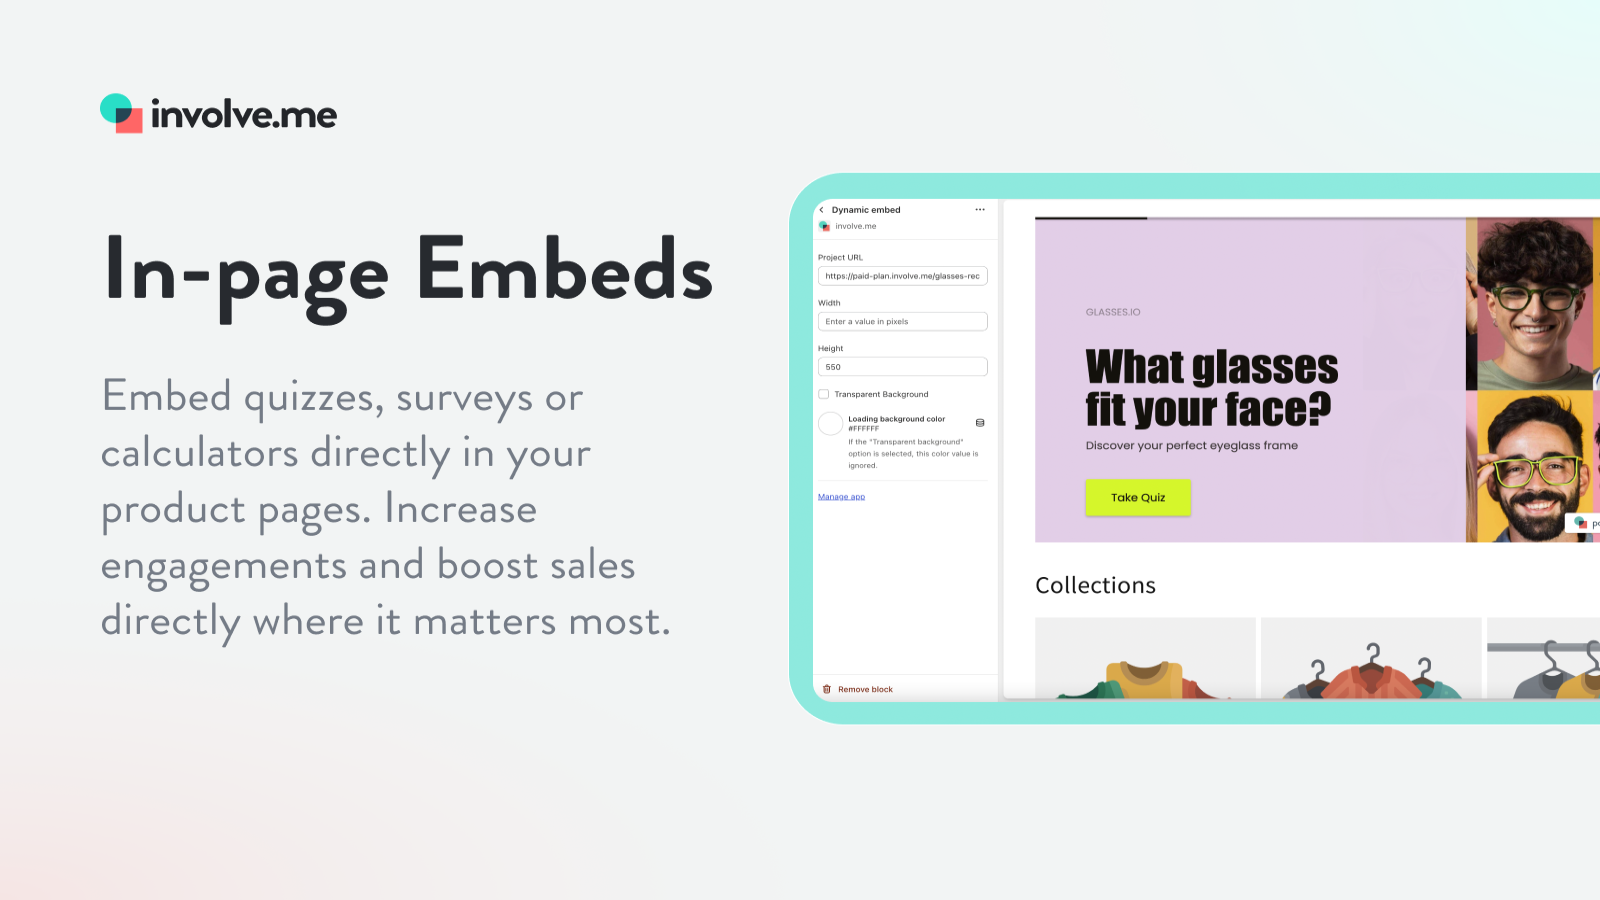 Embed quizzes, surveys and calculators in your store pages